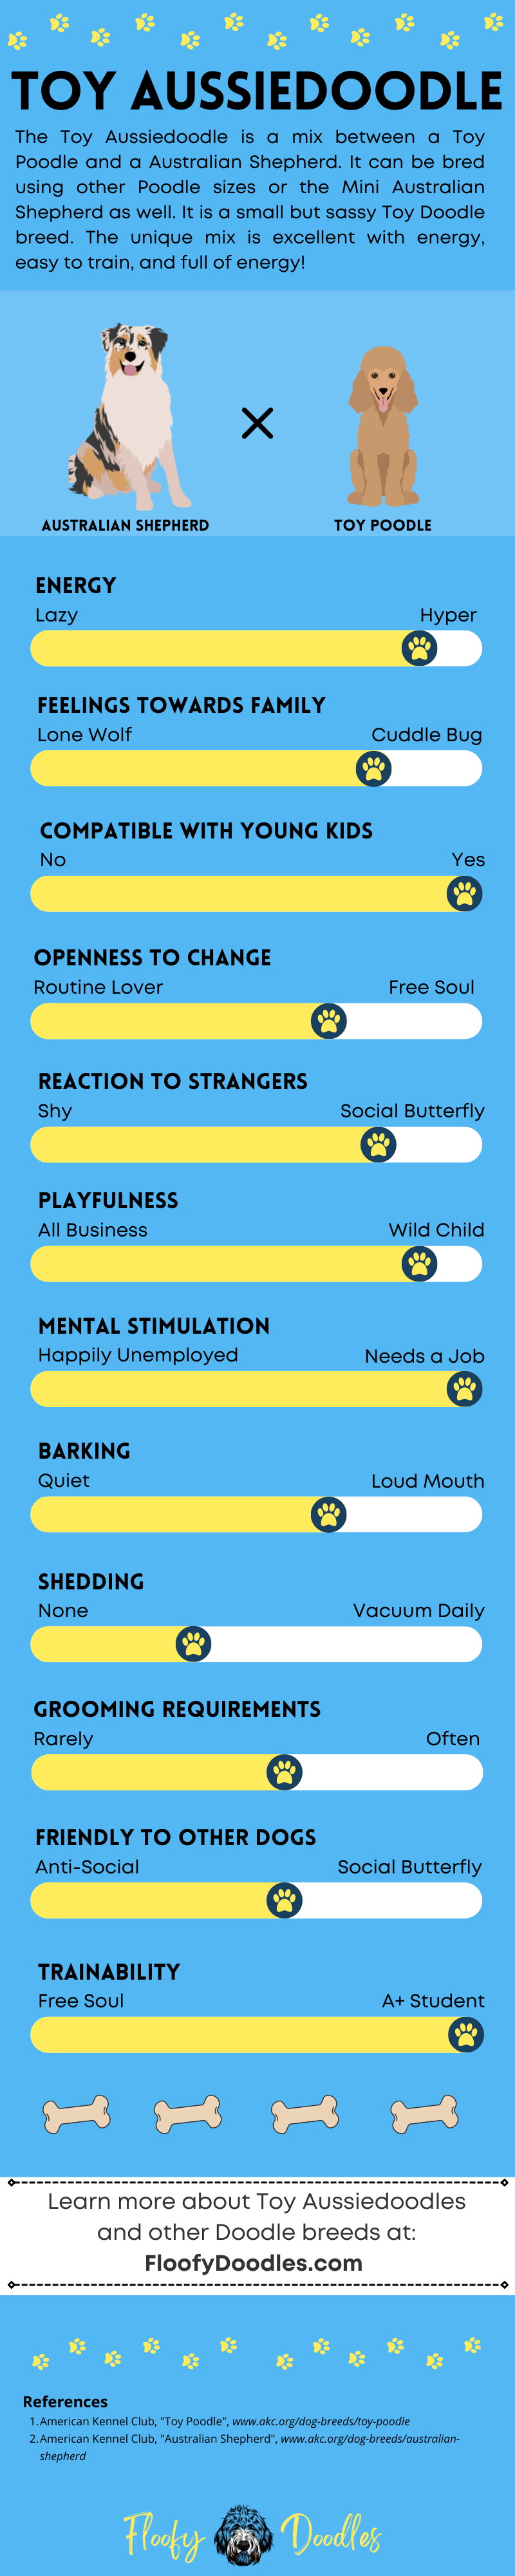 Rated categories of the different traits and characteristics of the Toy Aussiedoodle